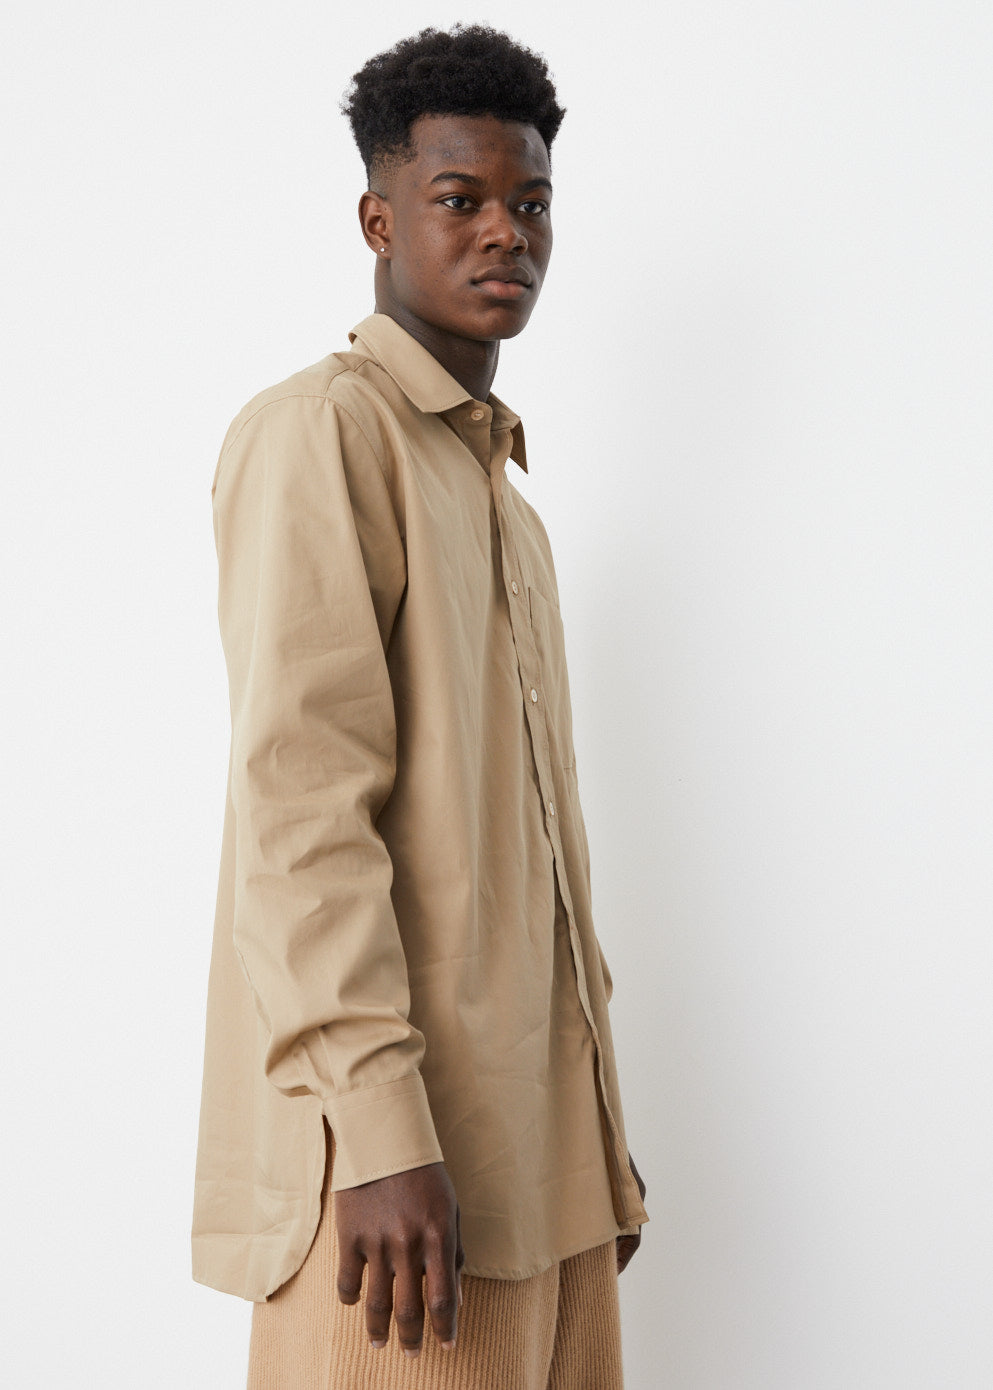 Cannon Bis Relaxed Shirt